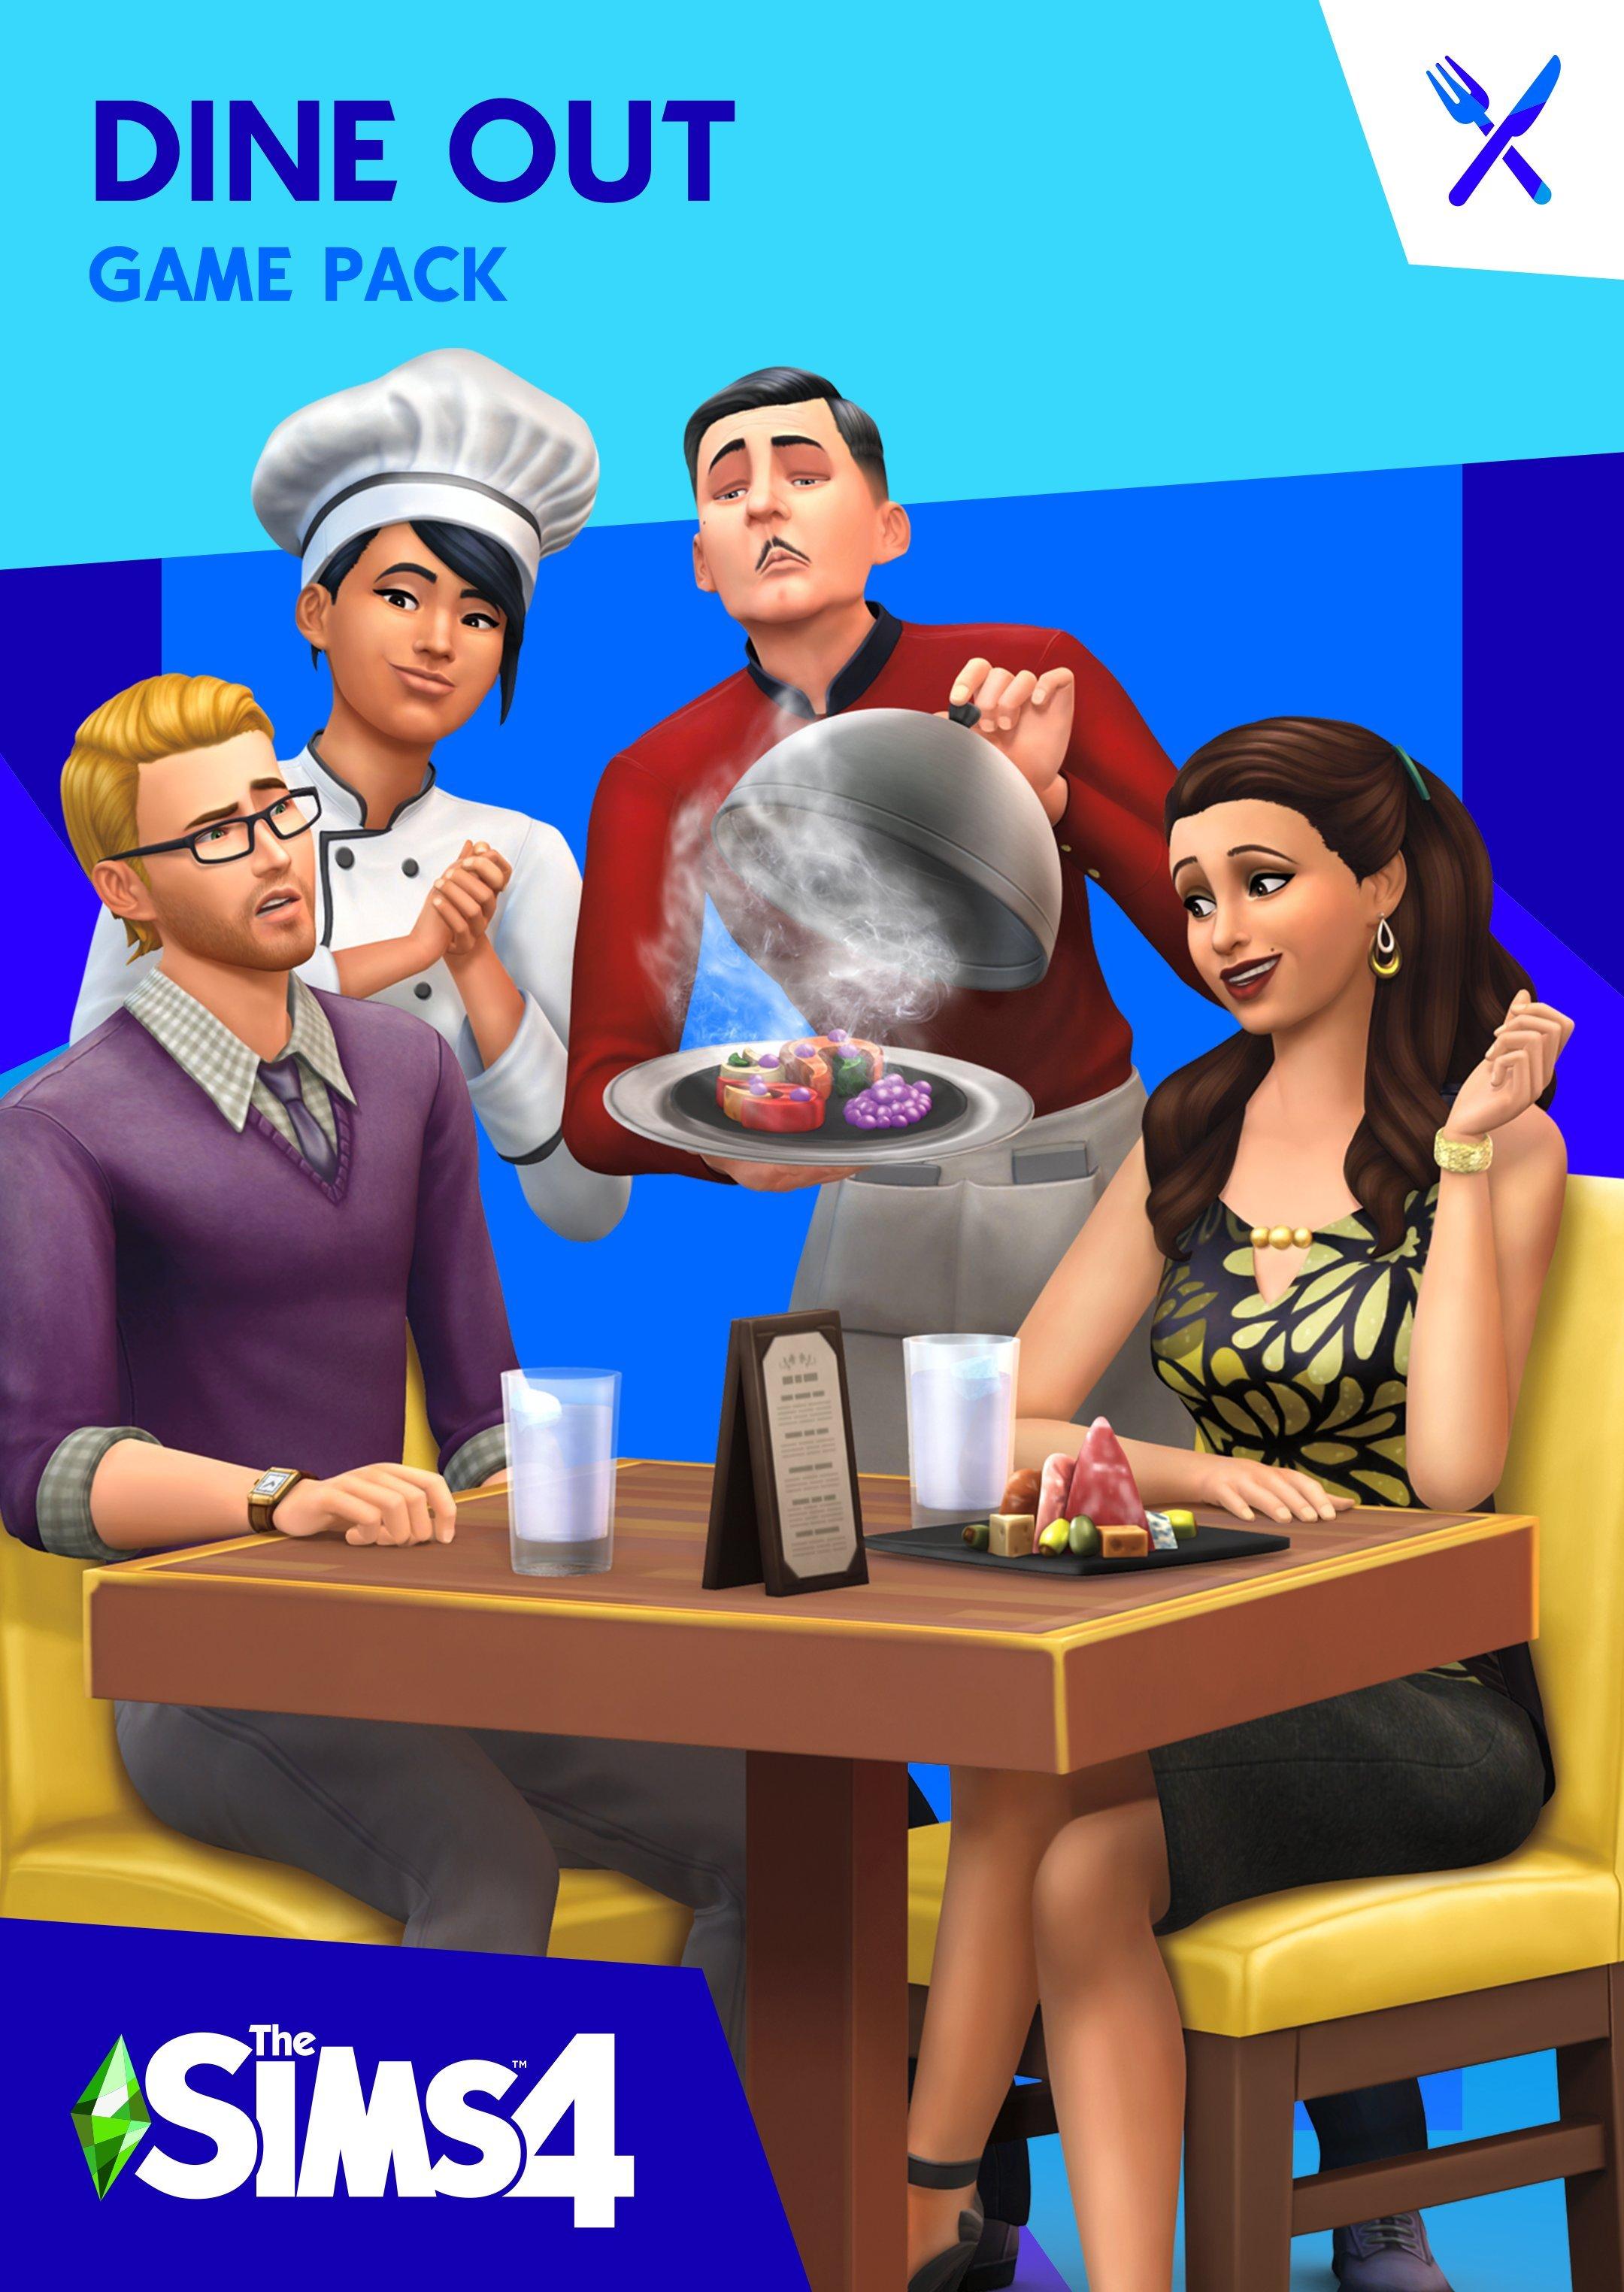 The Sims 4: Dine Out Pack